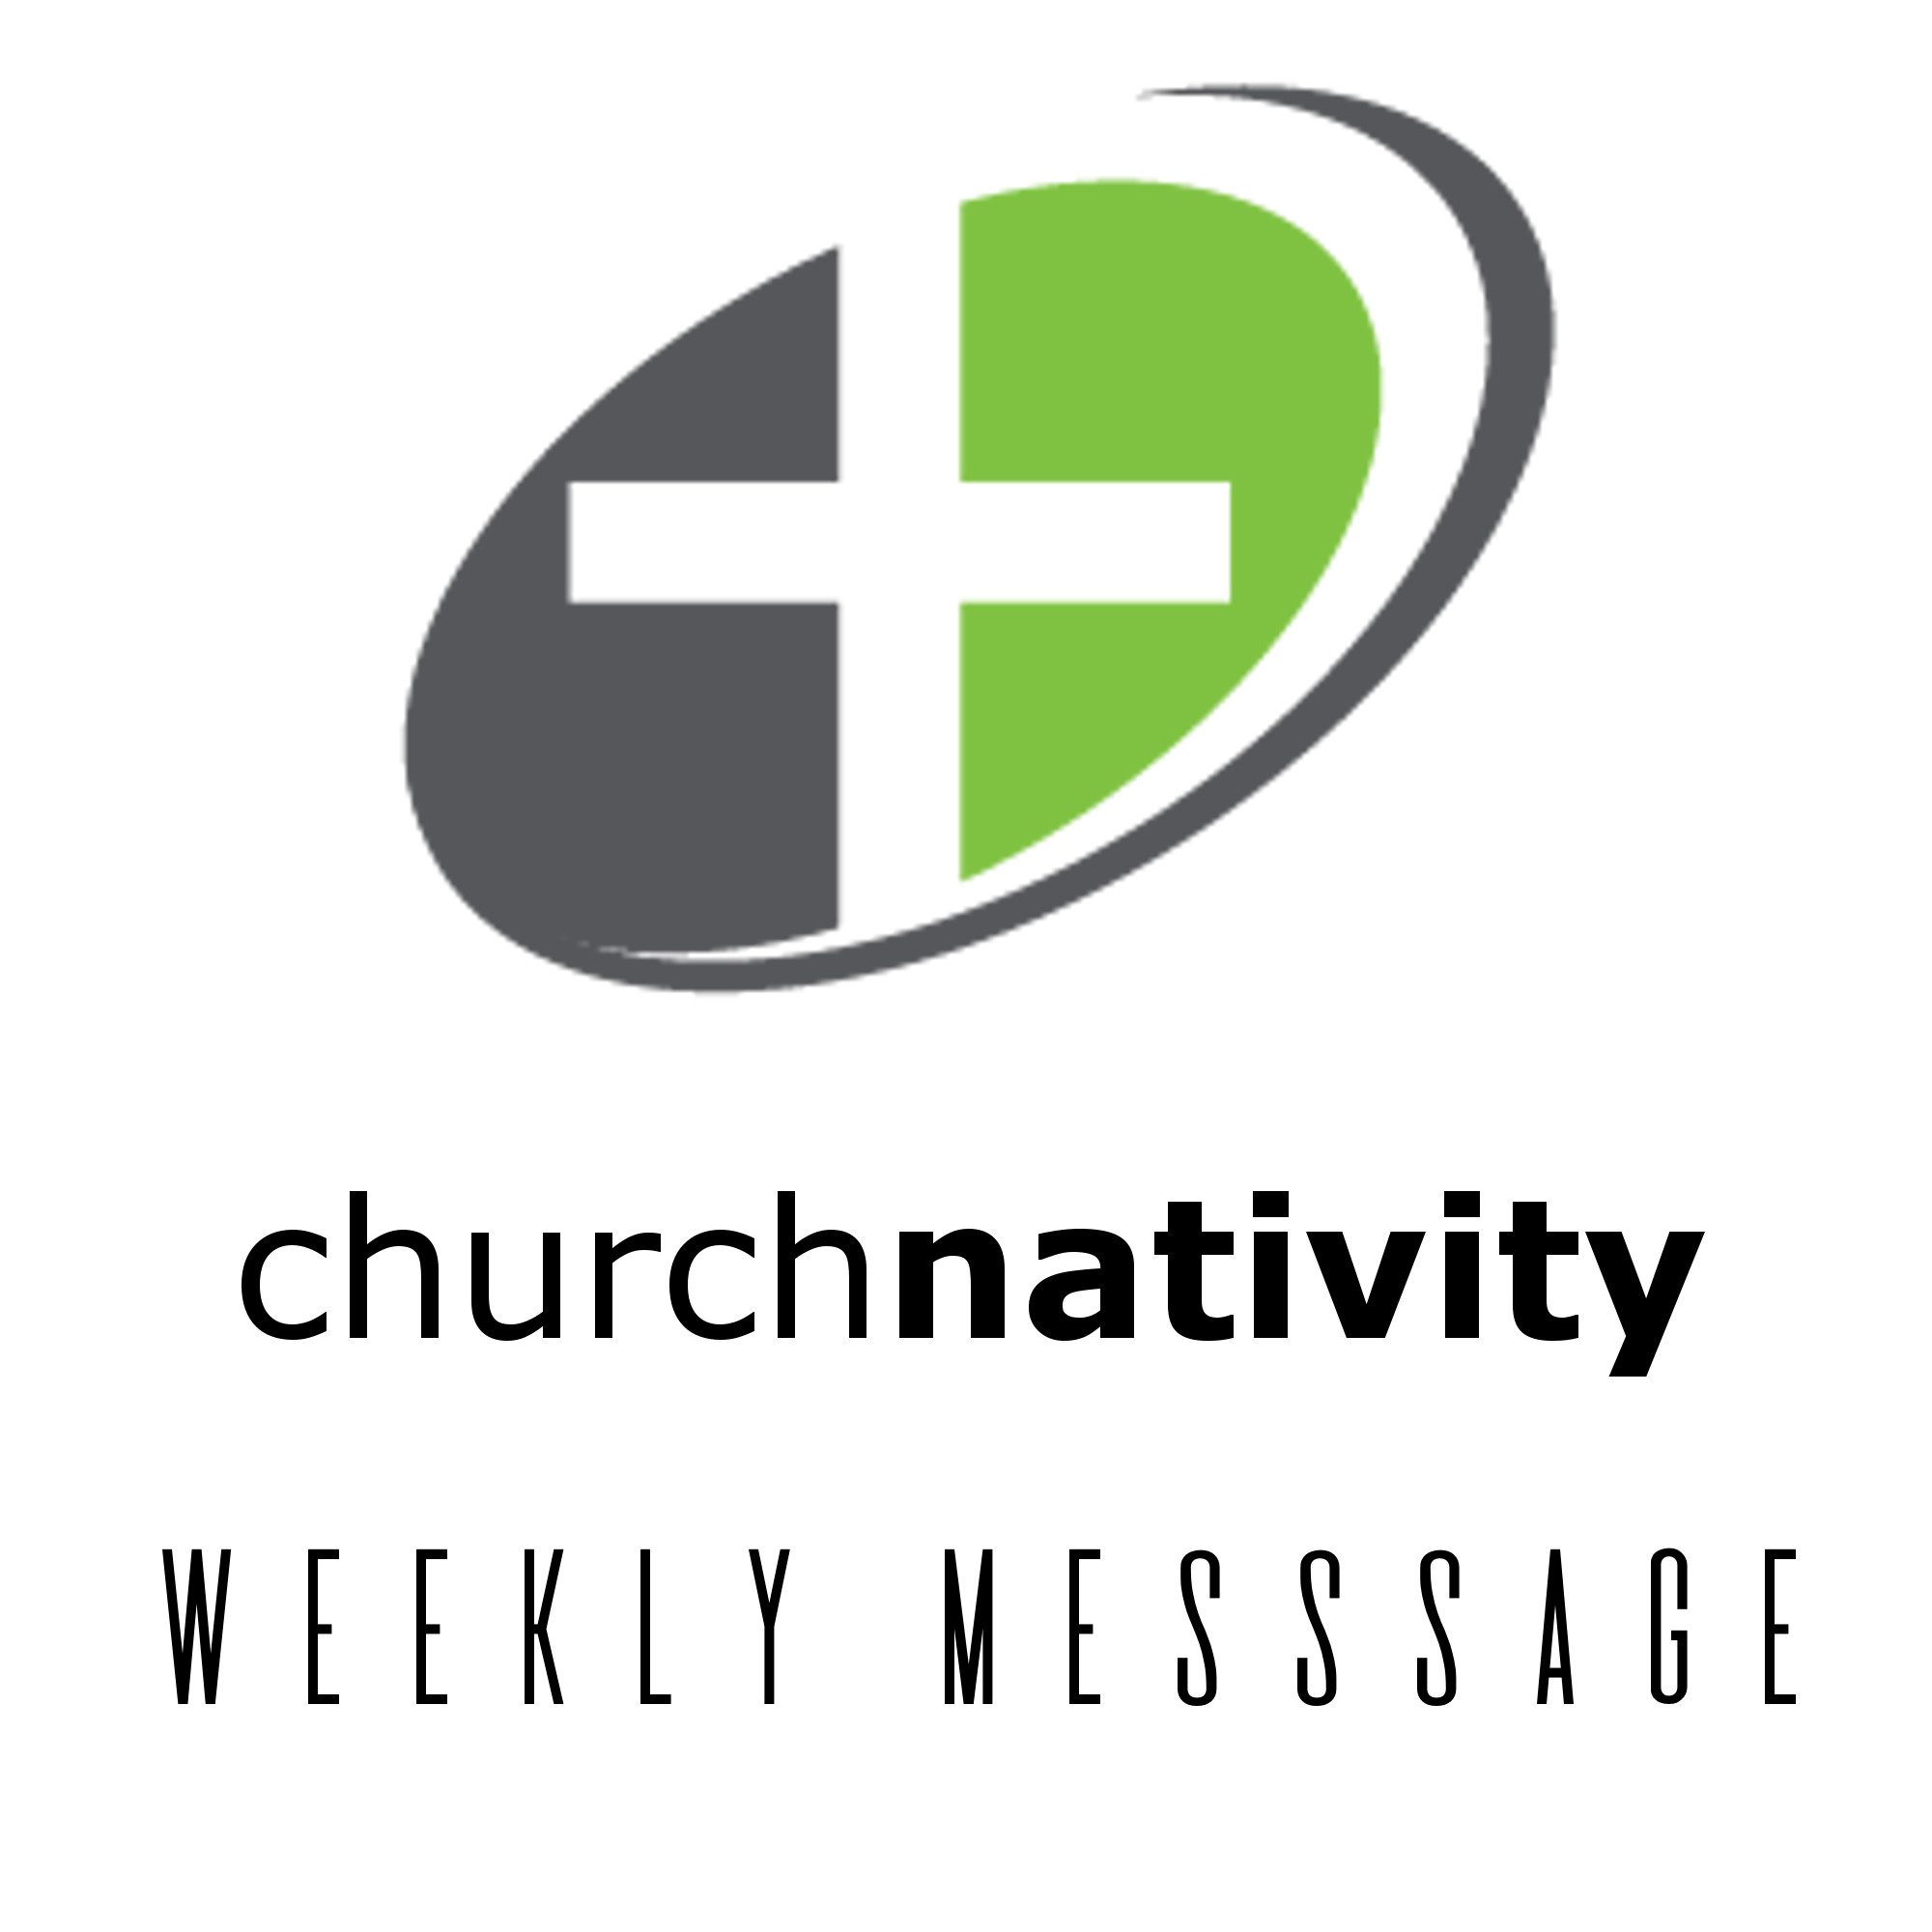 Church Nativity Weekly Message - Bad Guys of the Bible Week 1